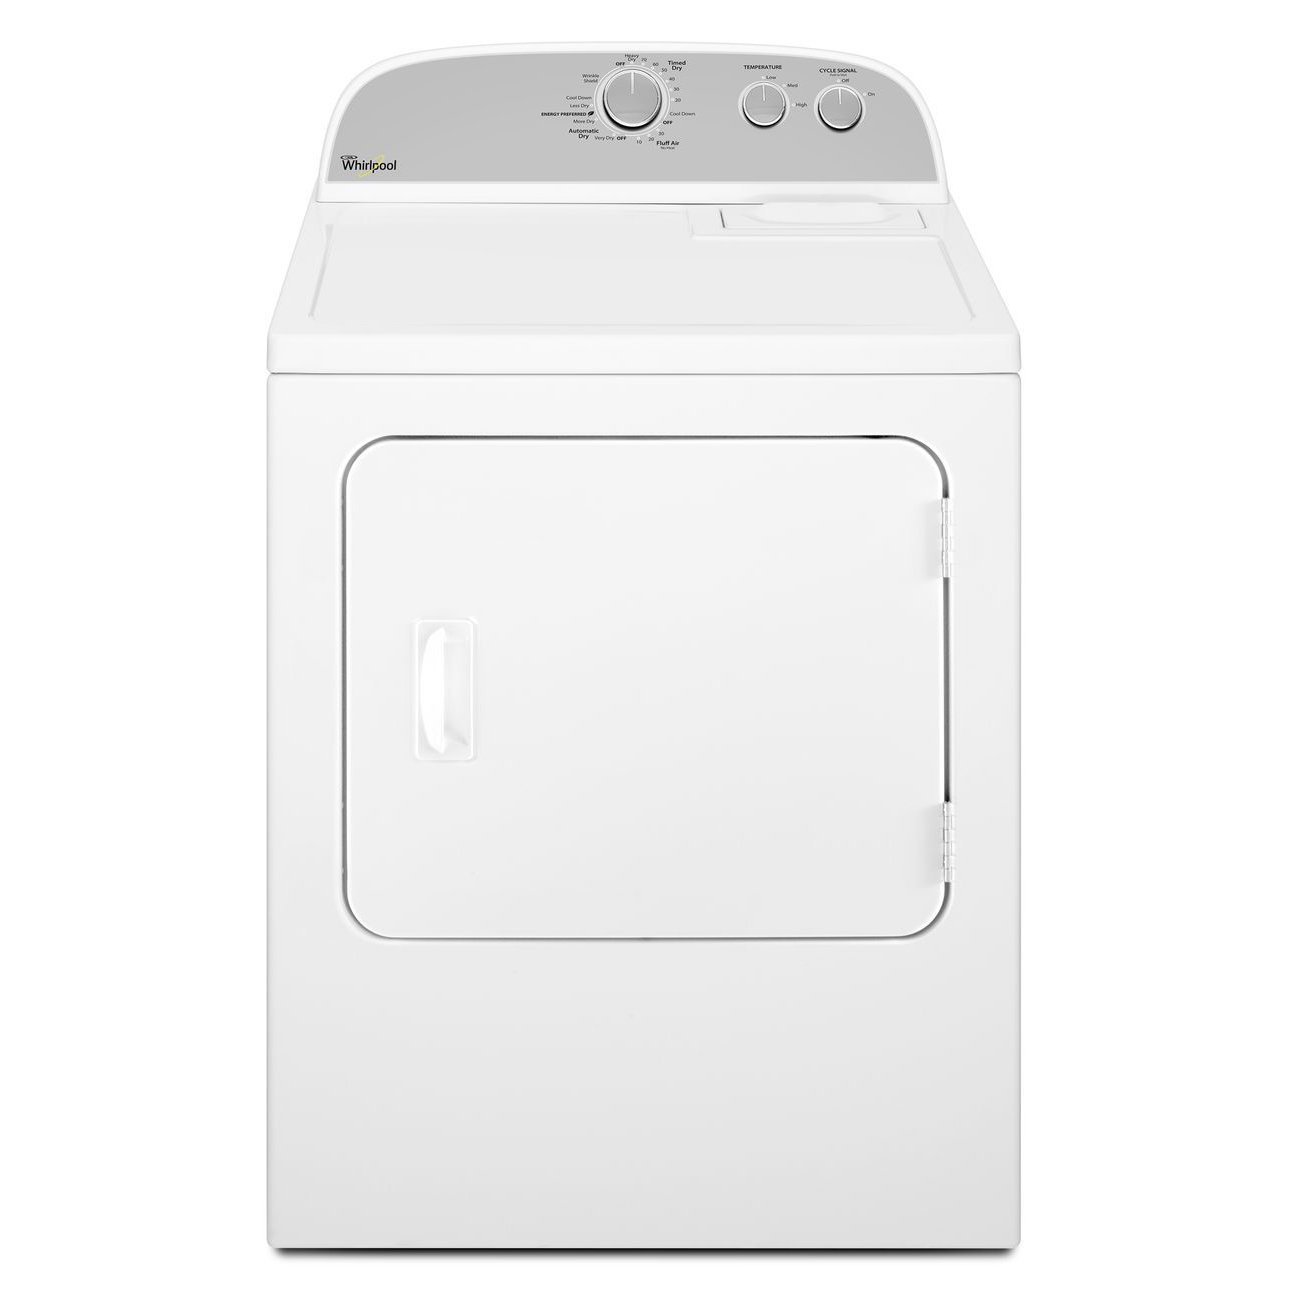 7.0 cu. ft. Top Load Electric Dryer with Heavy Duty Cycle - image 1 of 2